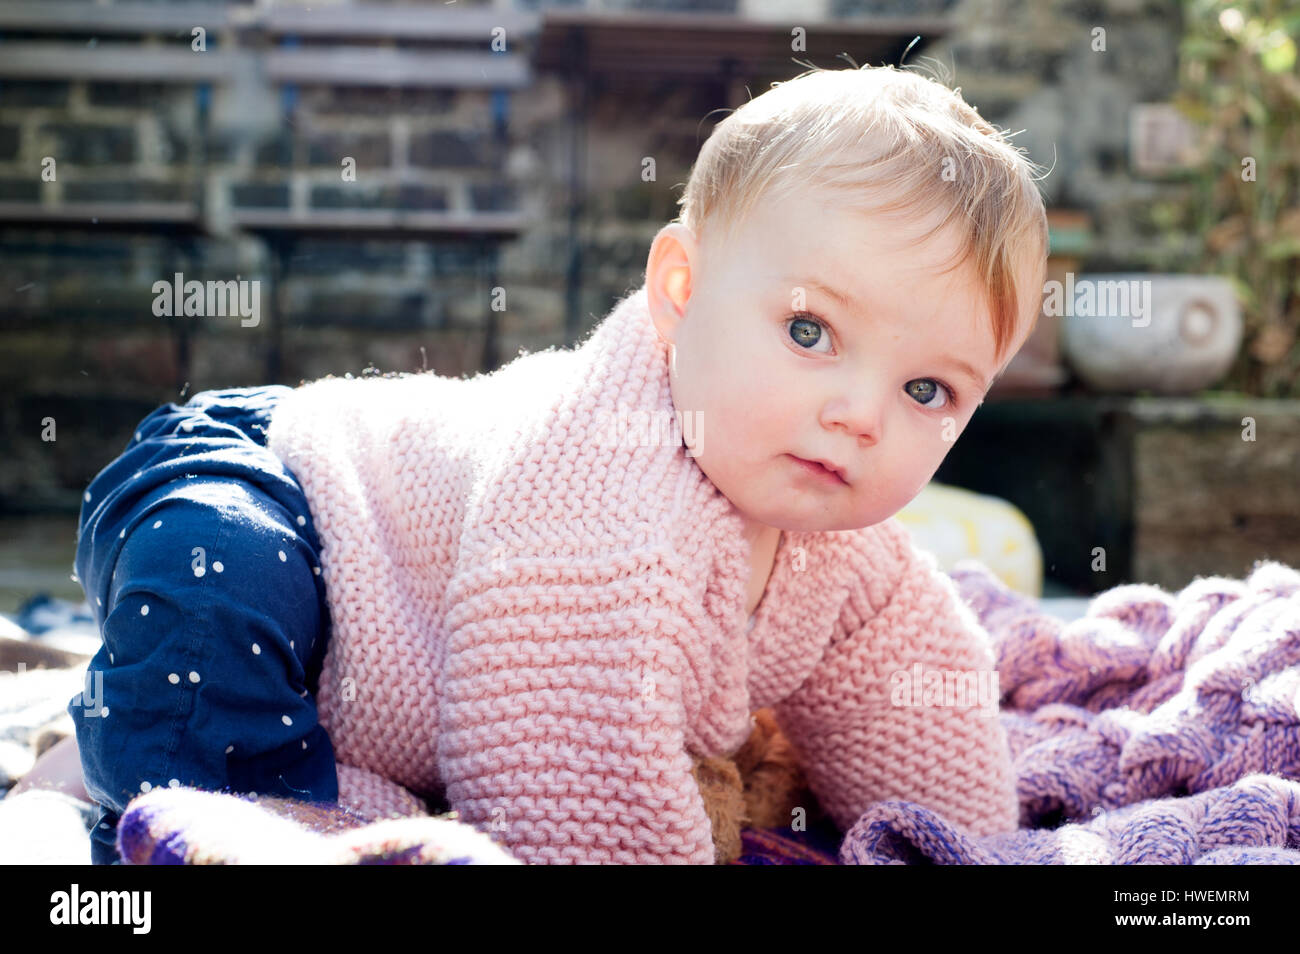 Portrait of baby girl crawling on knitted blanket in garden Stock Photo